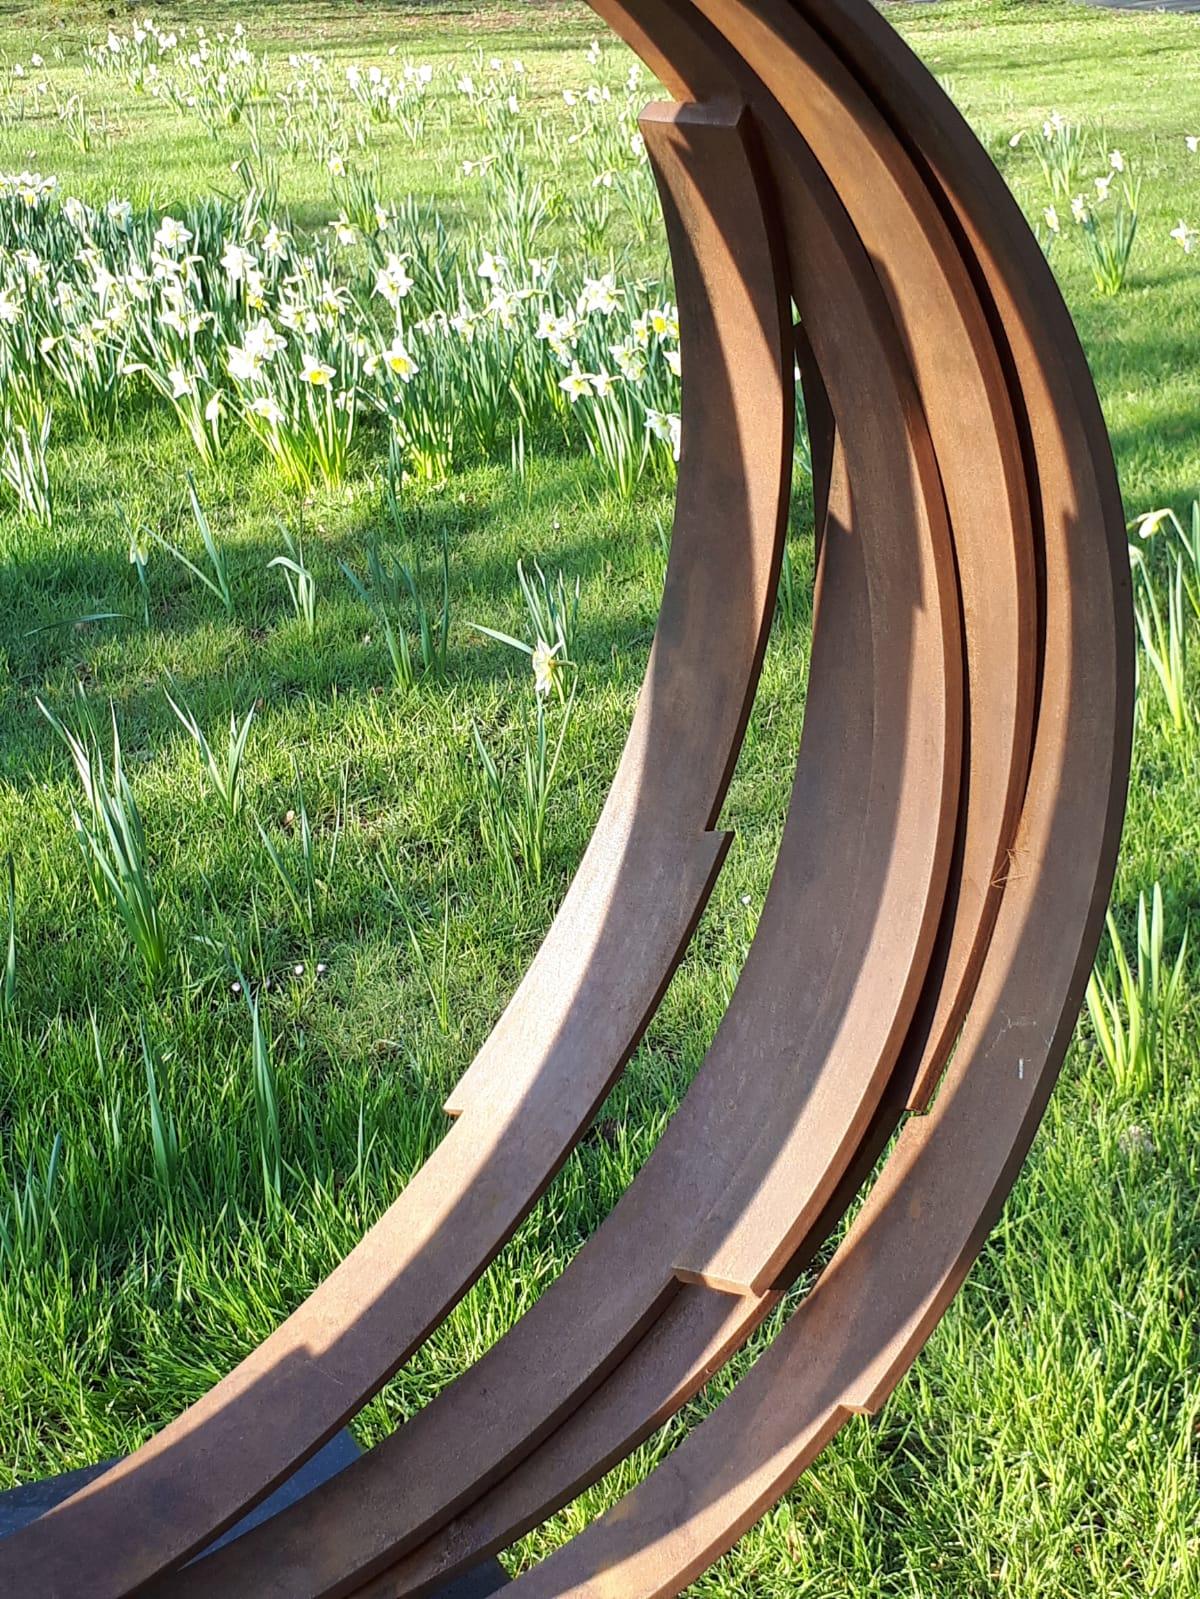 Large Orbit by Kuno Vollet - Contemporary Rusted Steel sculpture for Outdoors 3